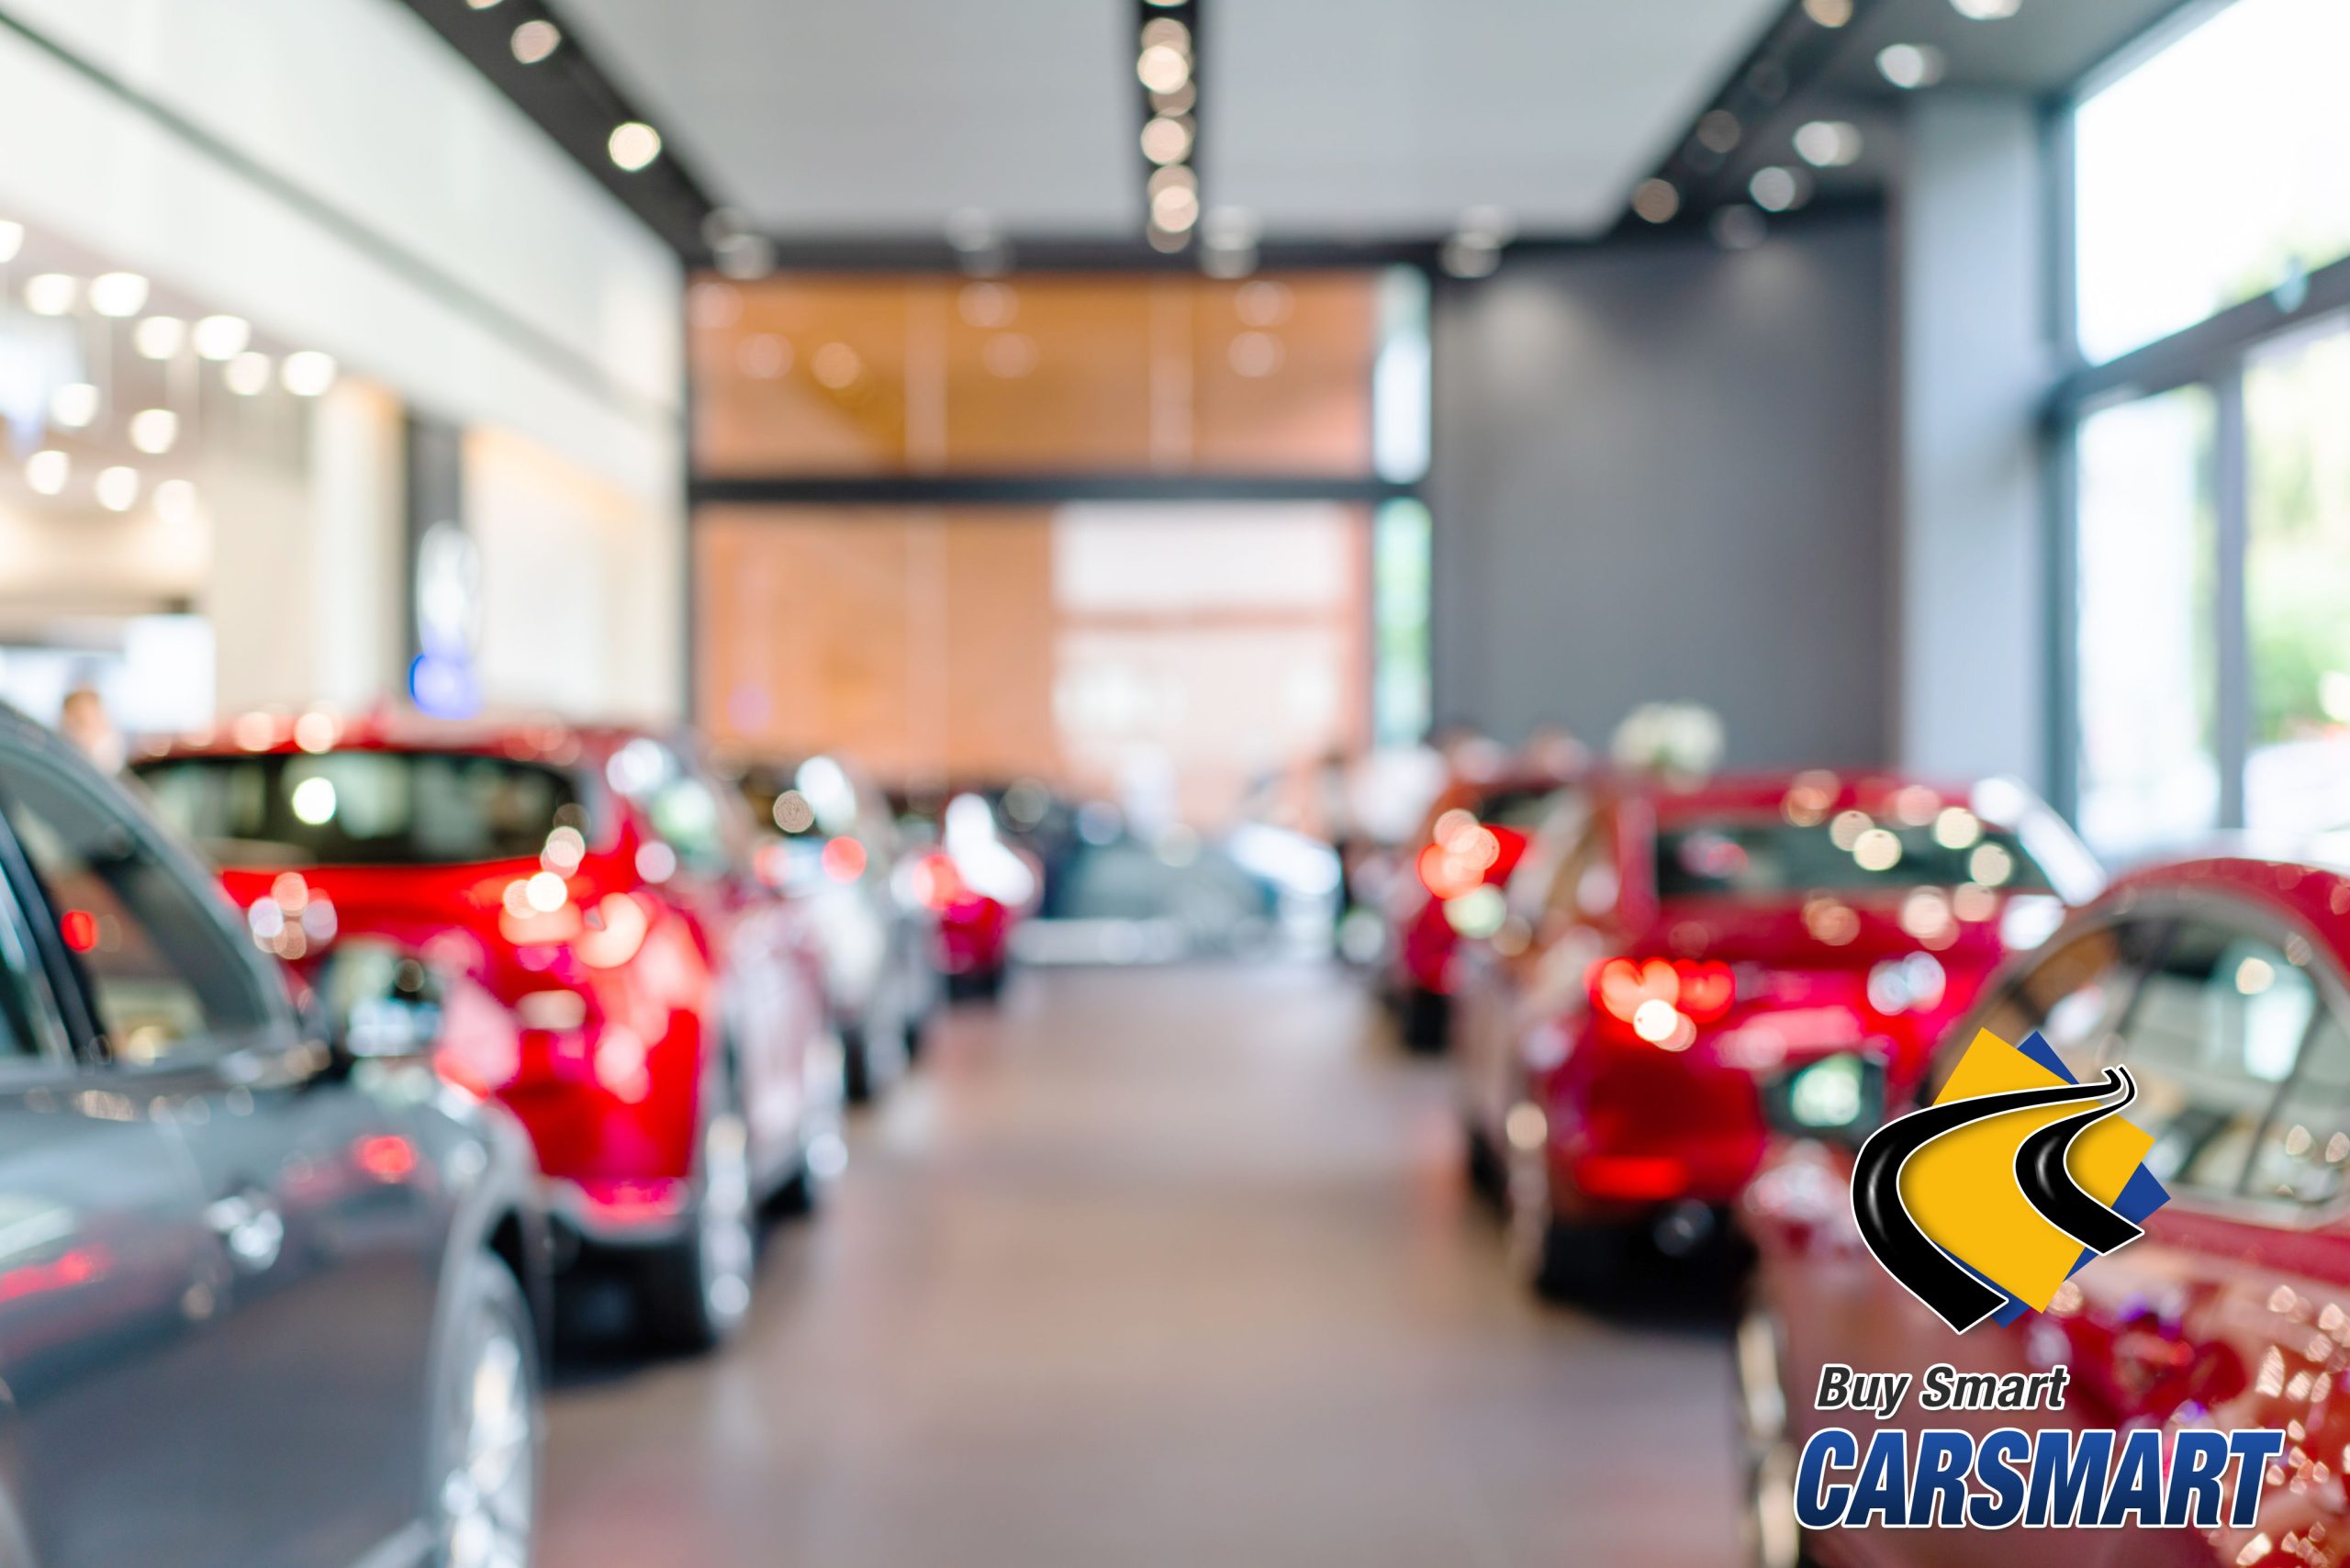 CarSmart: A Reliable Car Dealer for Your Automotive Needs in Washington DC